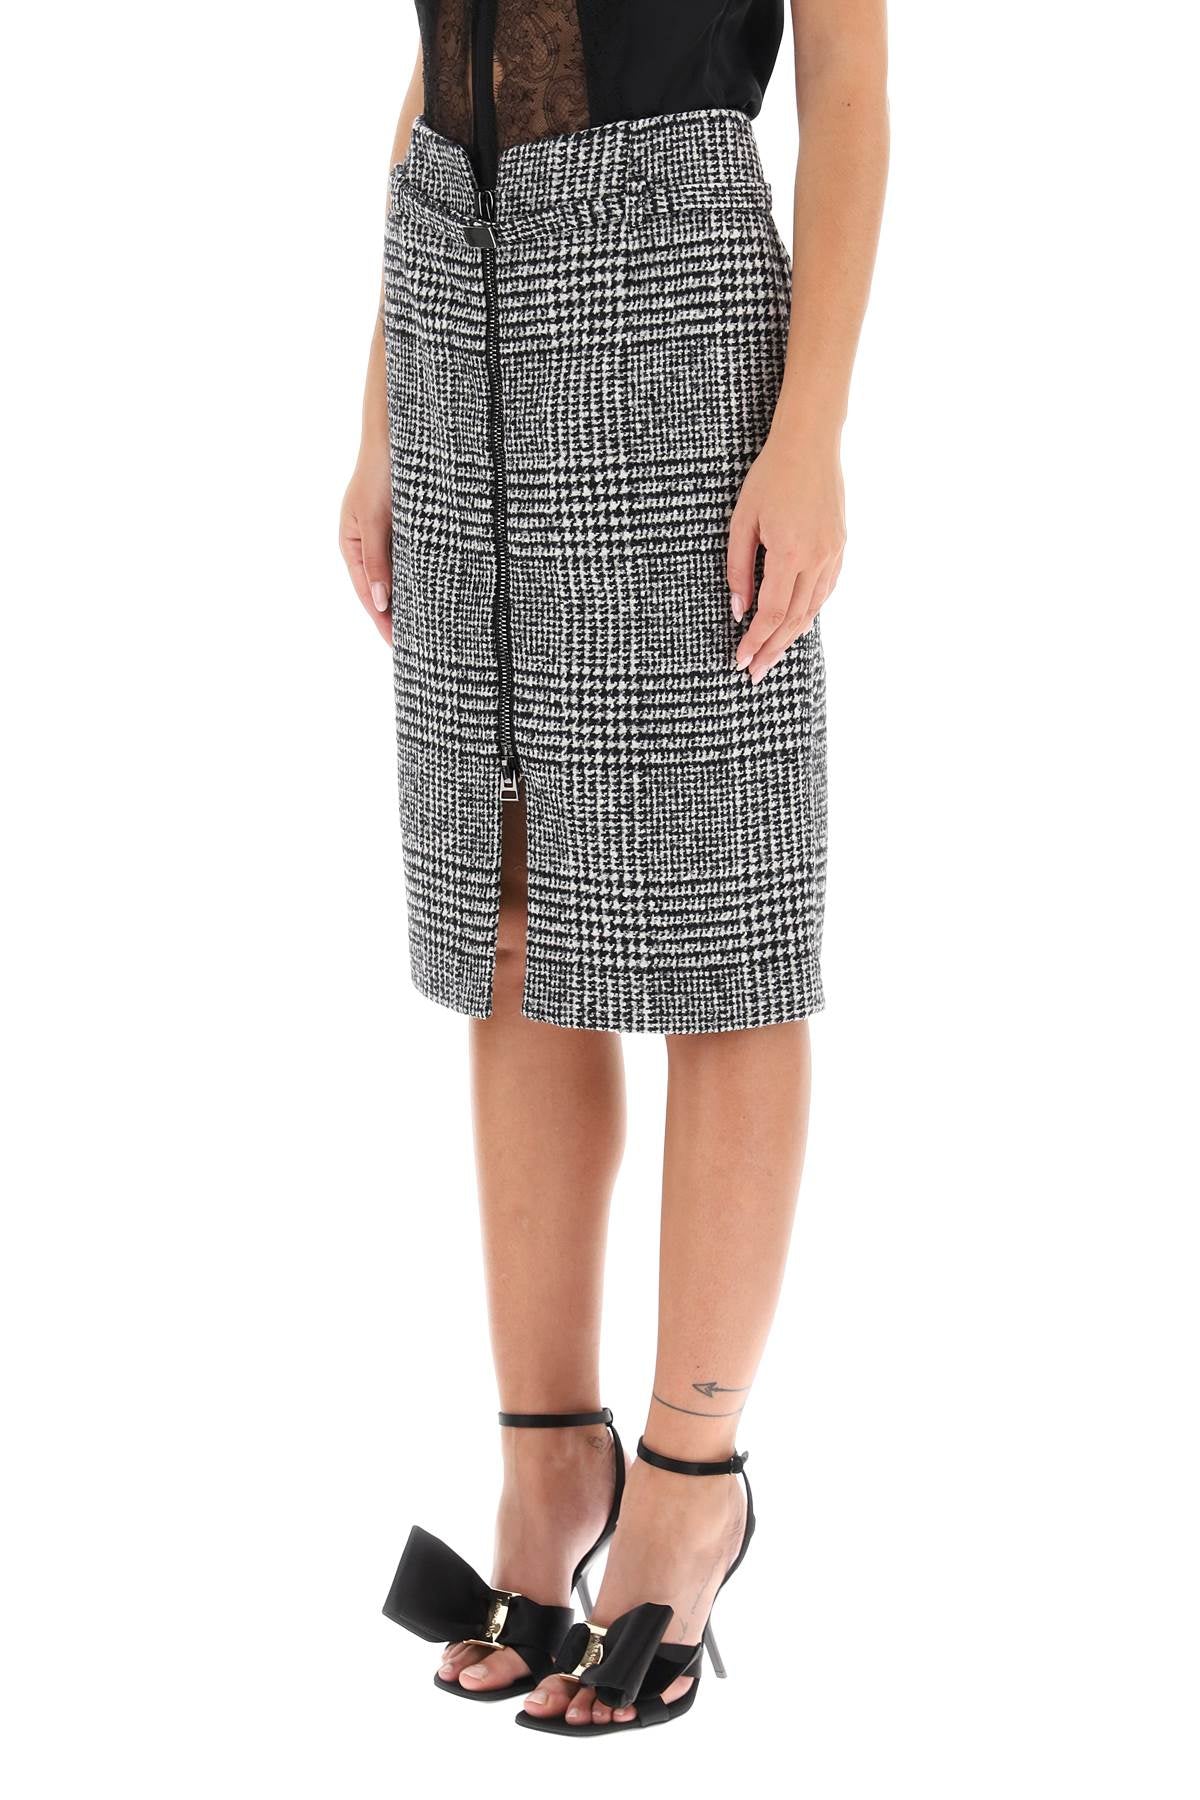 Tom ford prince of wales pencil skirt-3